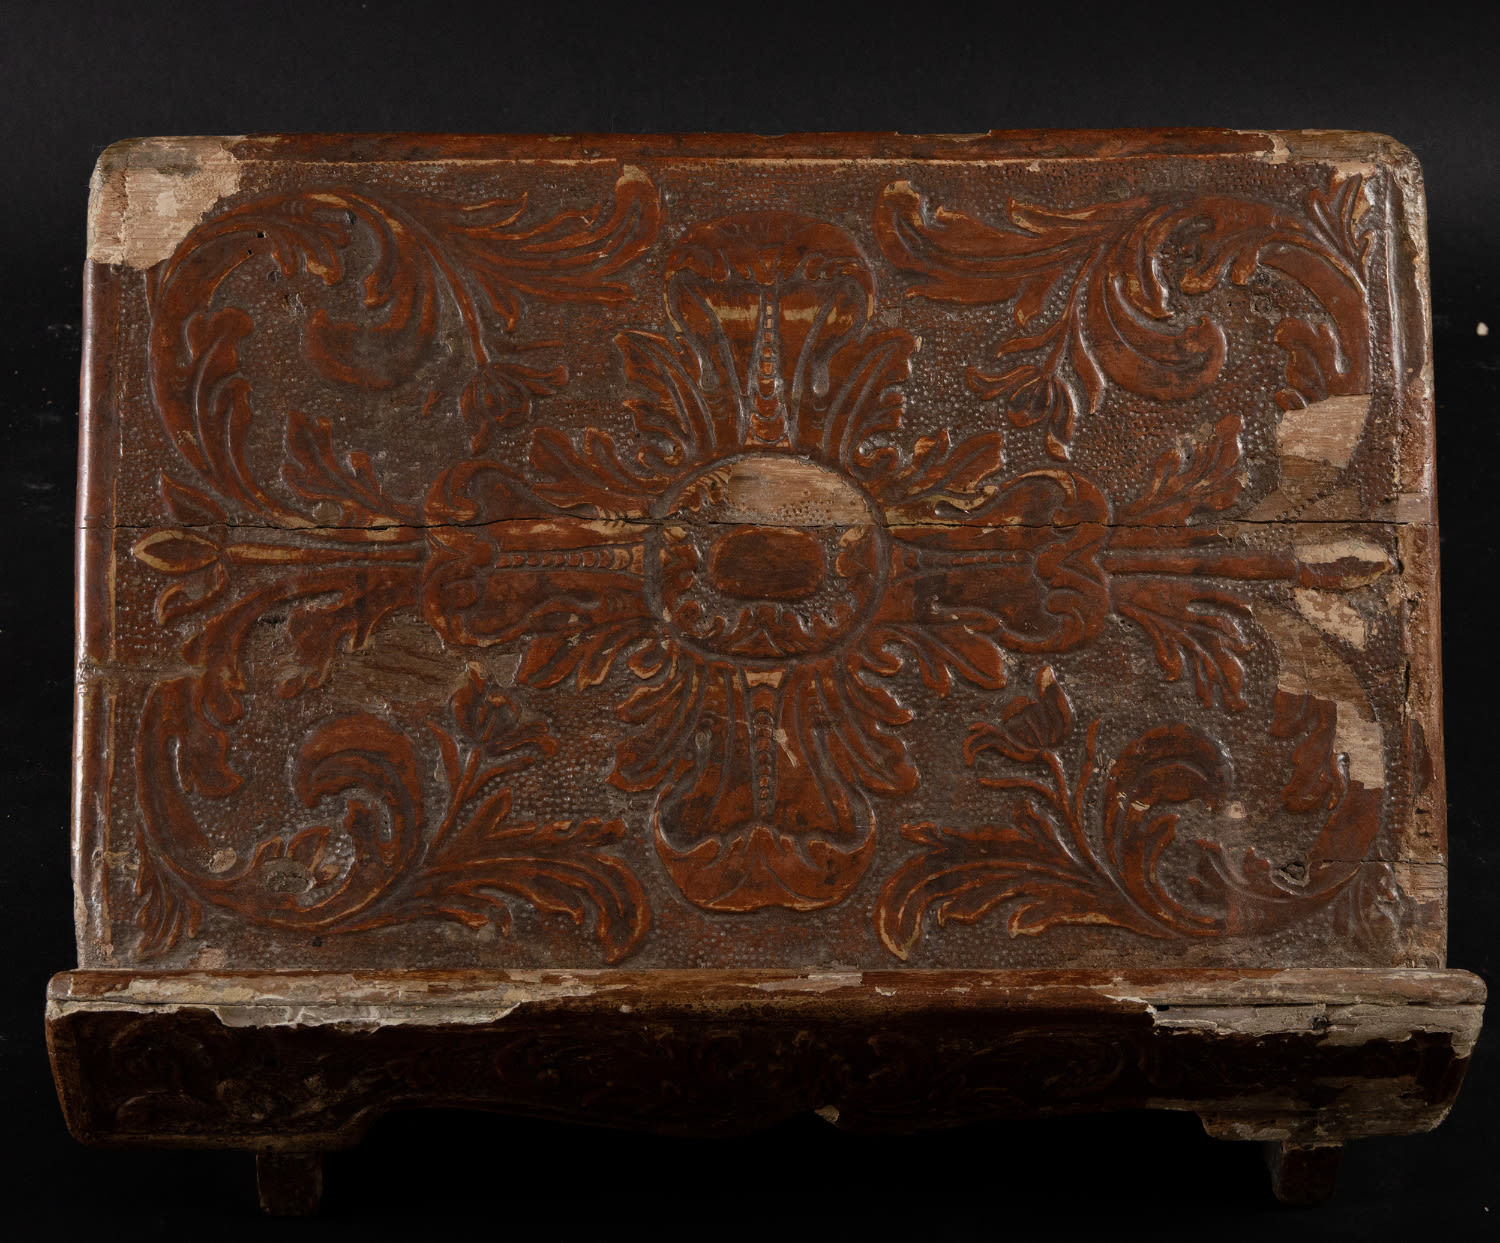 Plateresque Lectern in wood covered in Embossed Leather, 16th century